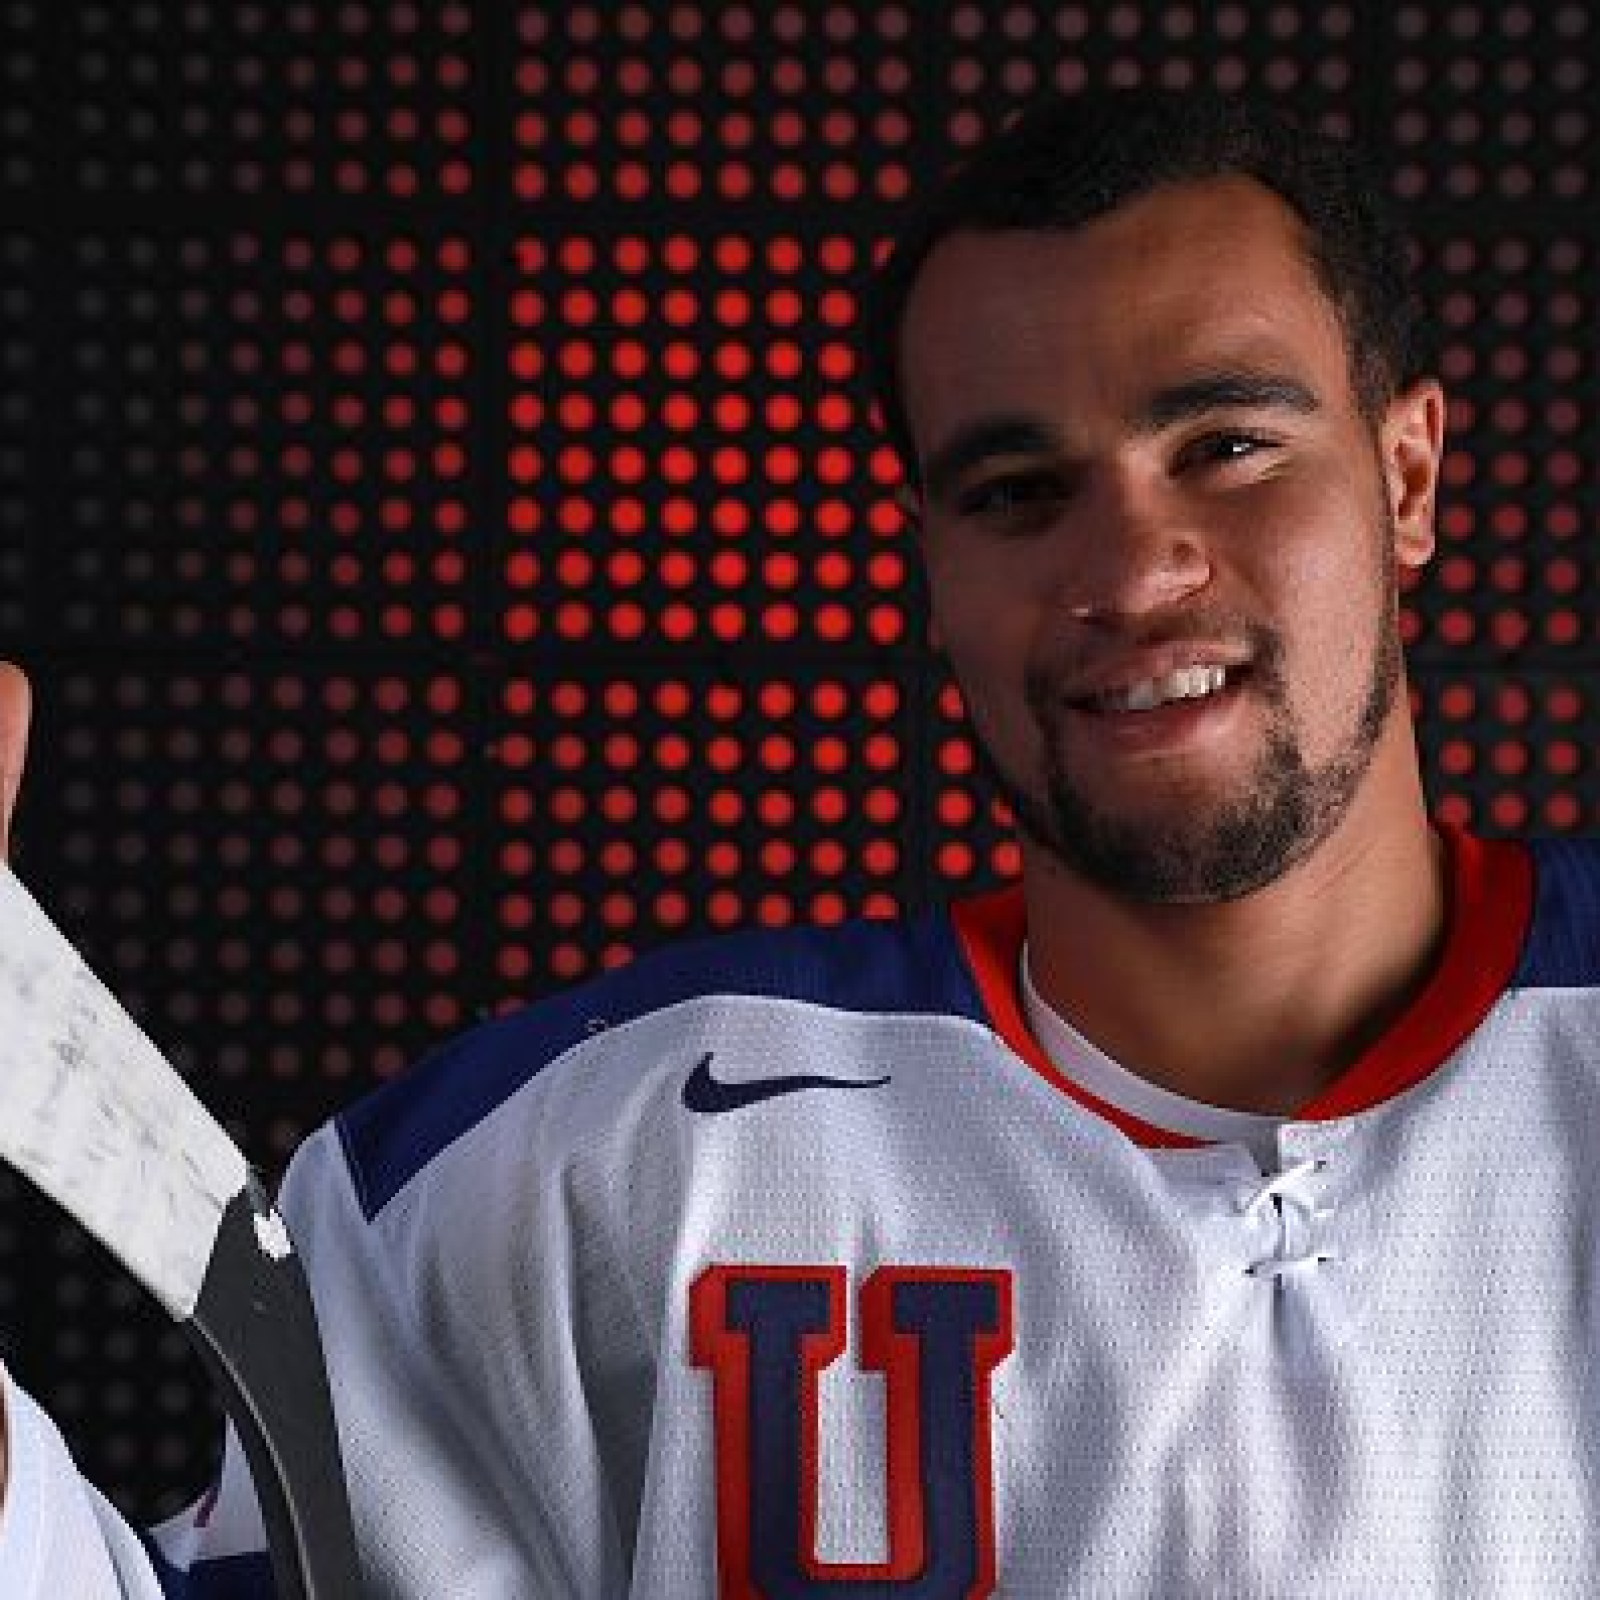 Jordan Greenway, 1st African-American to play hockey for Team USA, is  living his dream